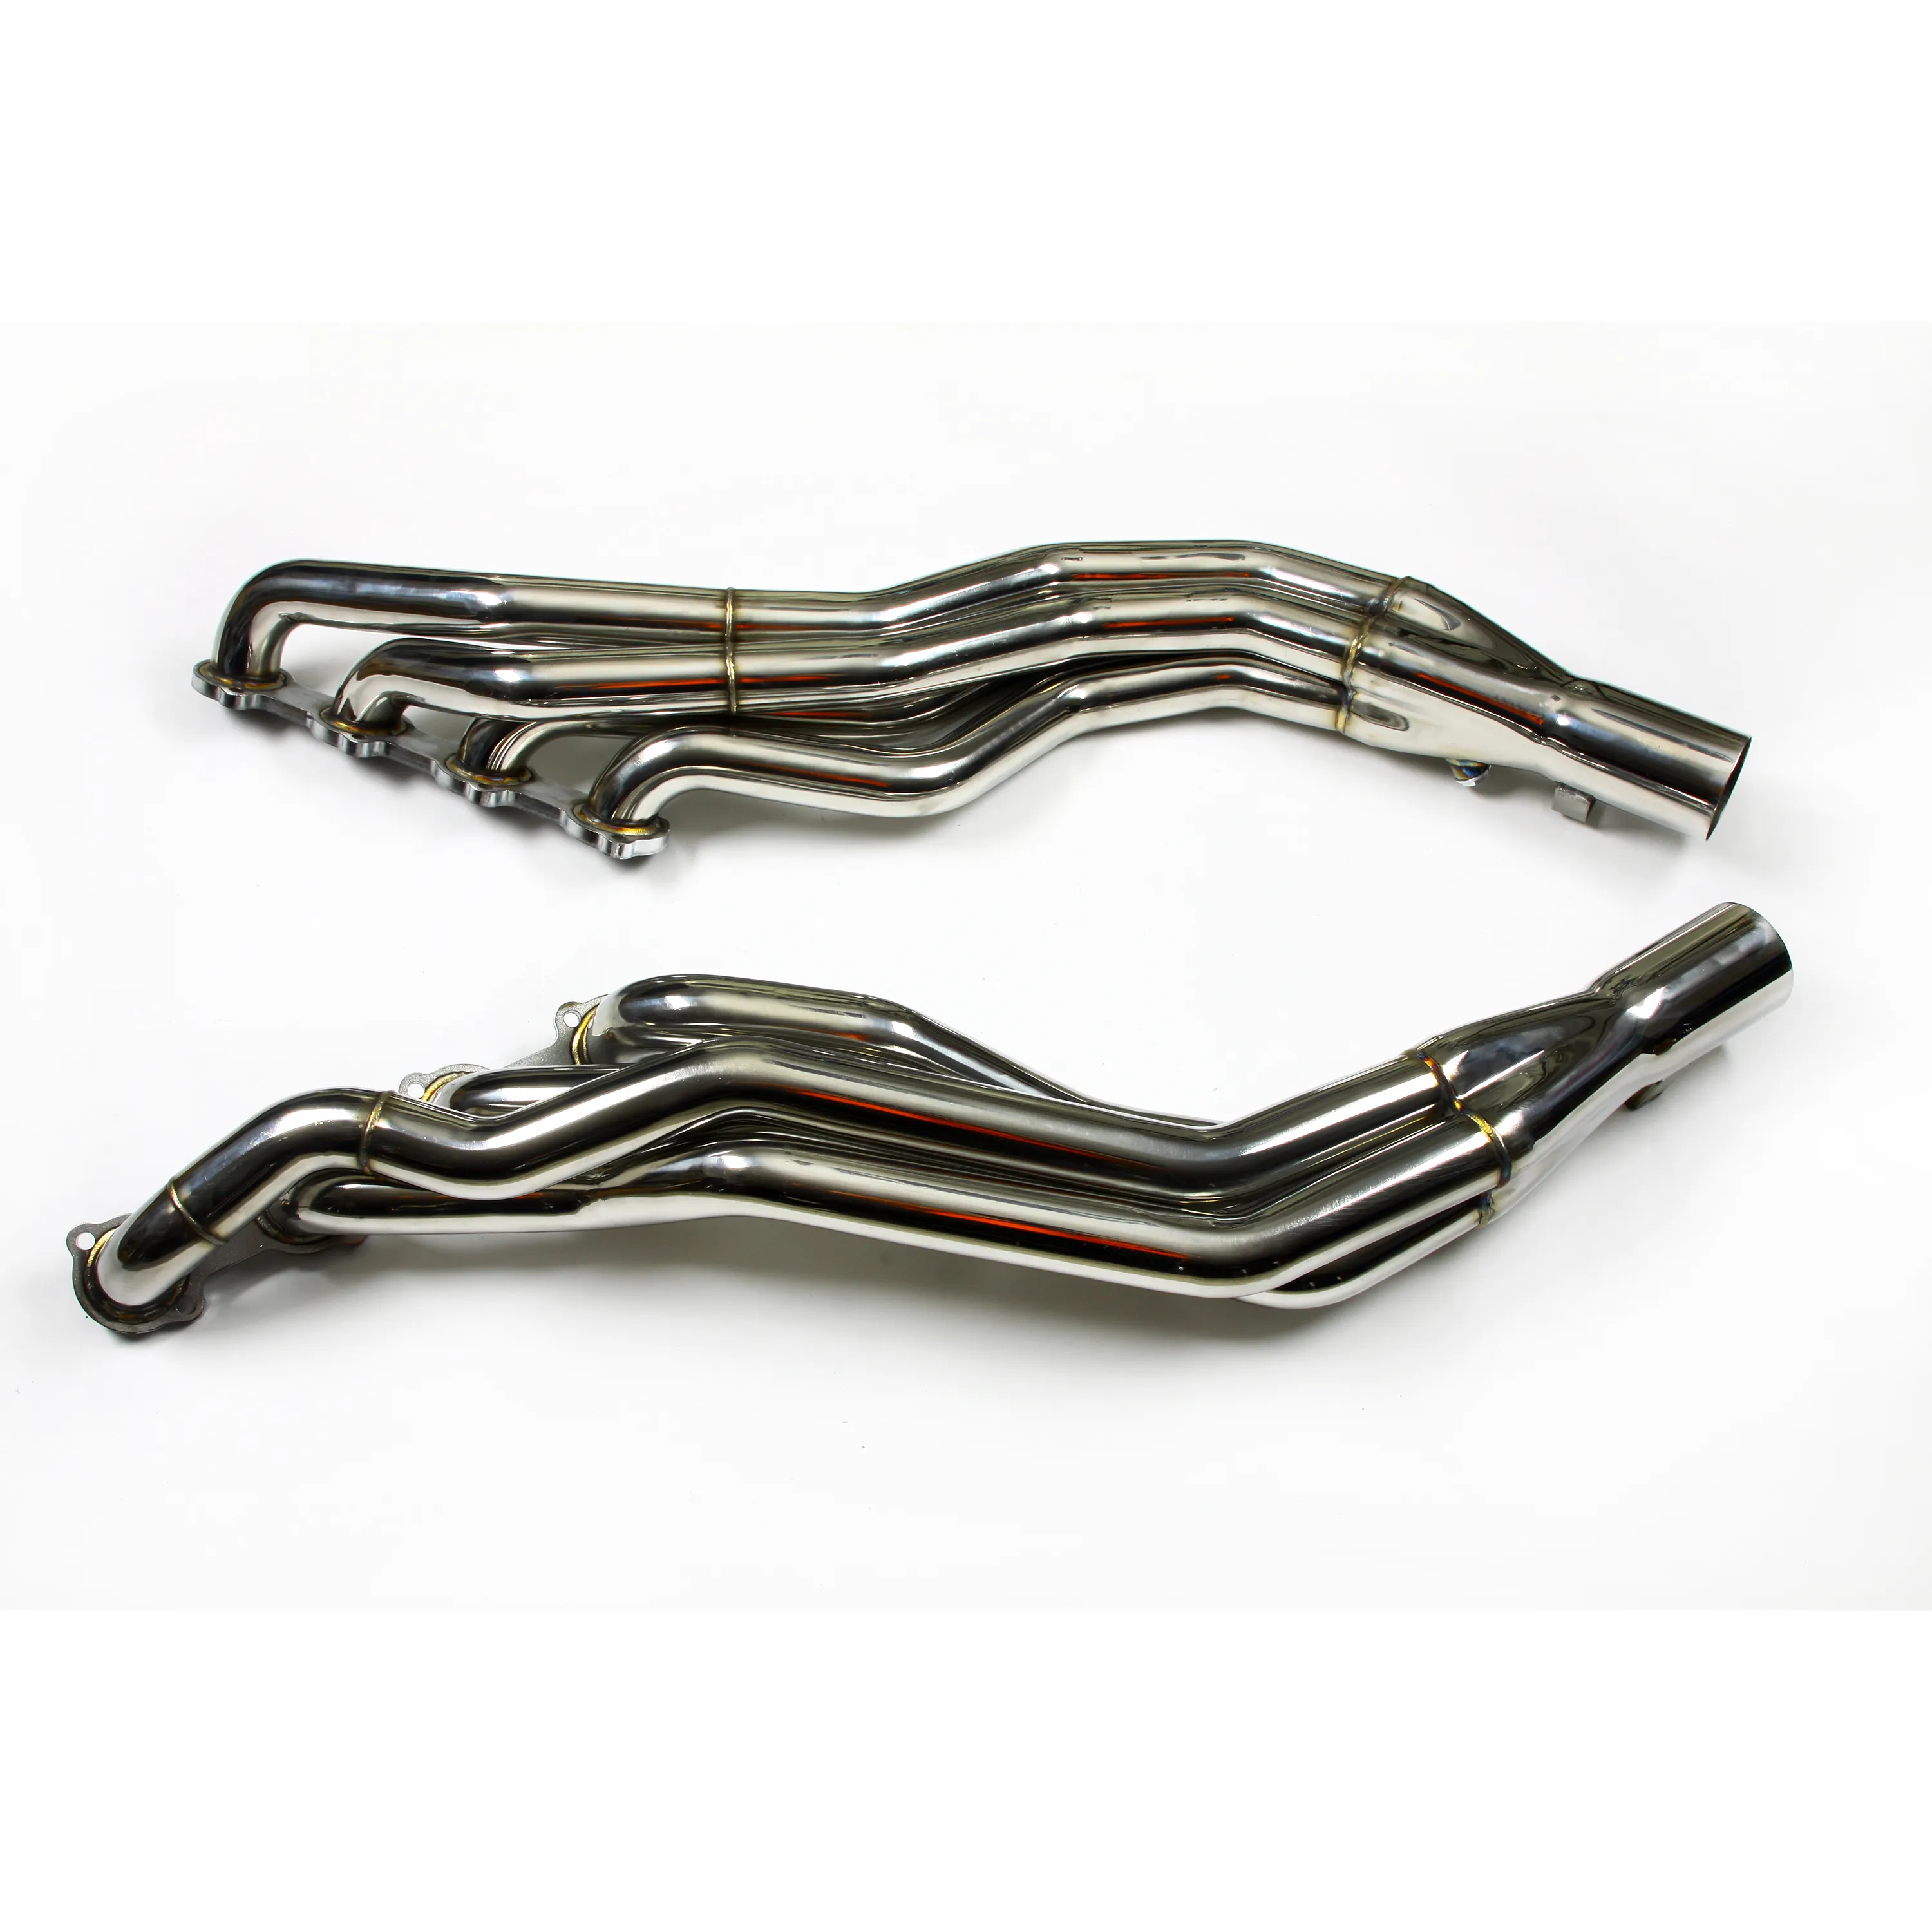 Steel Exhaust Manifold Header For Mercedes Benz AMG CLS55 CLS500 E55 E500 M113K Long For 5.4L Engine Models